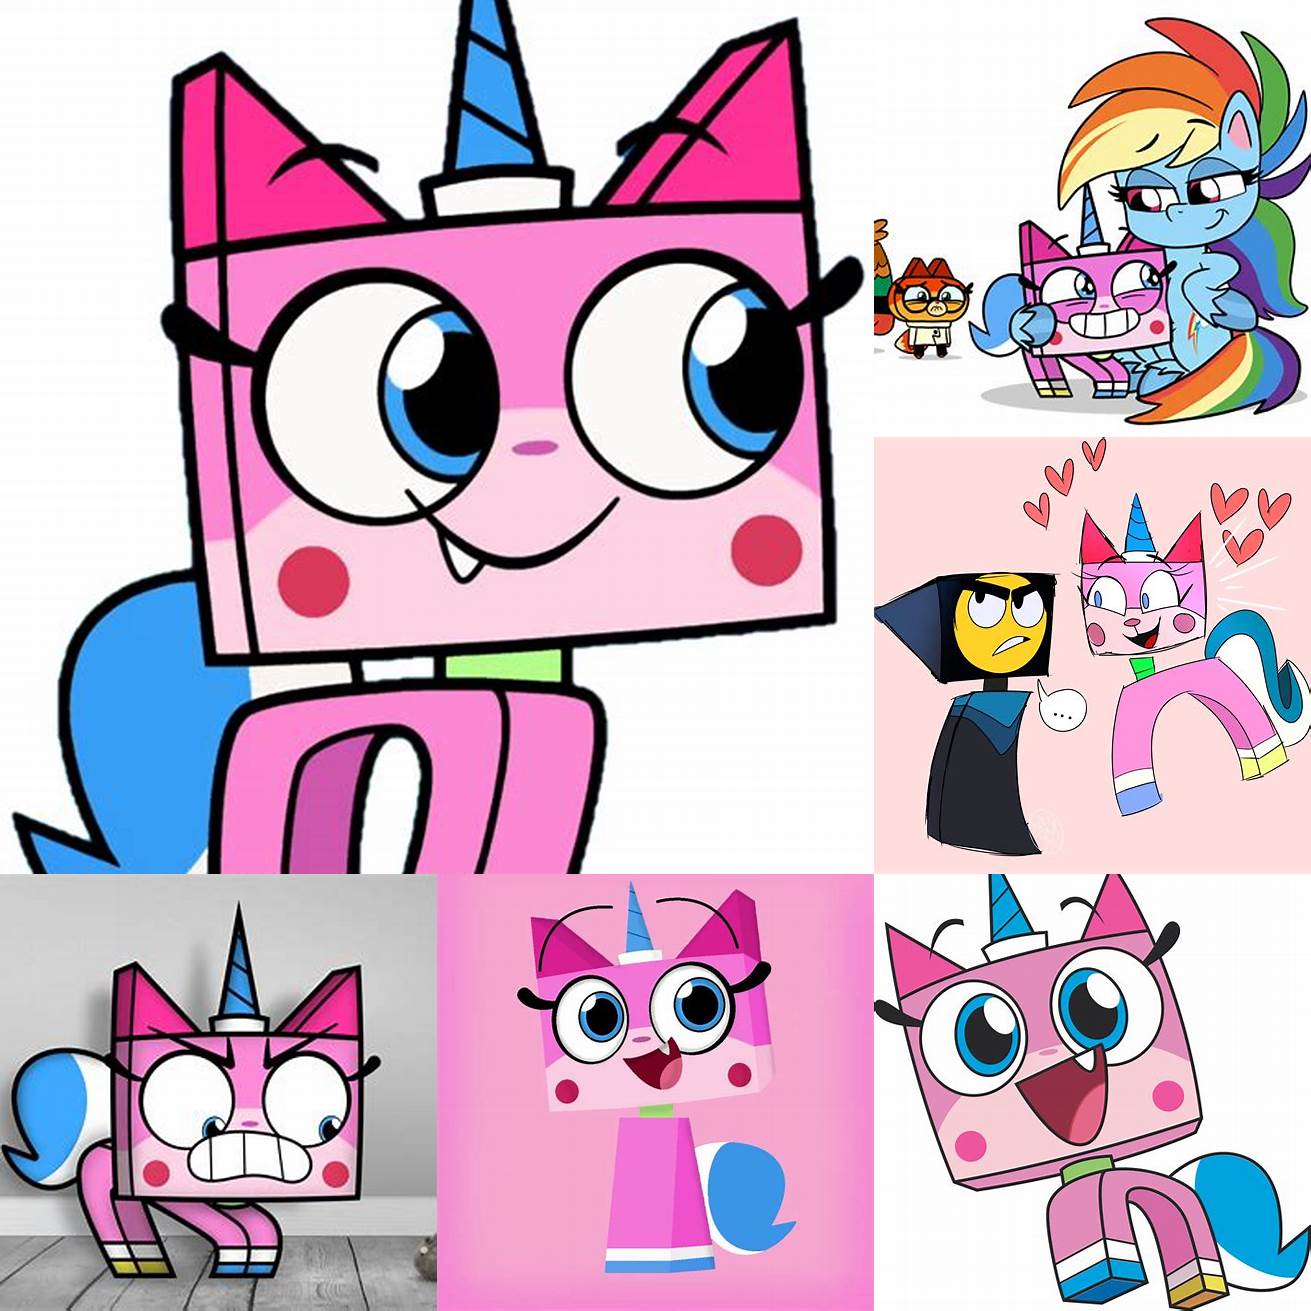 The cat and Unikitty hanging out